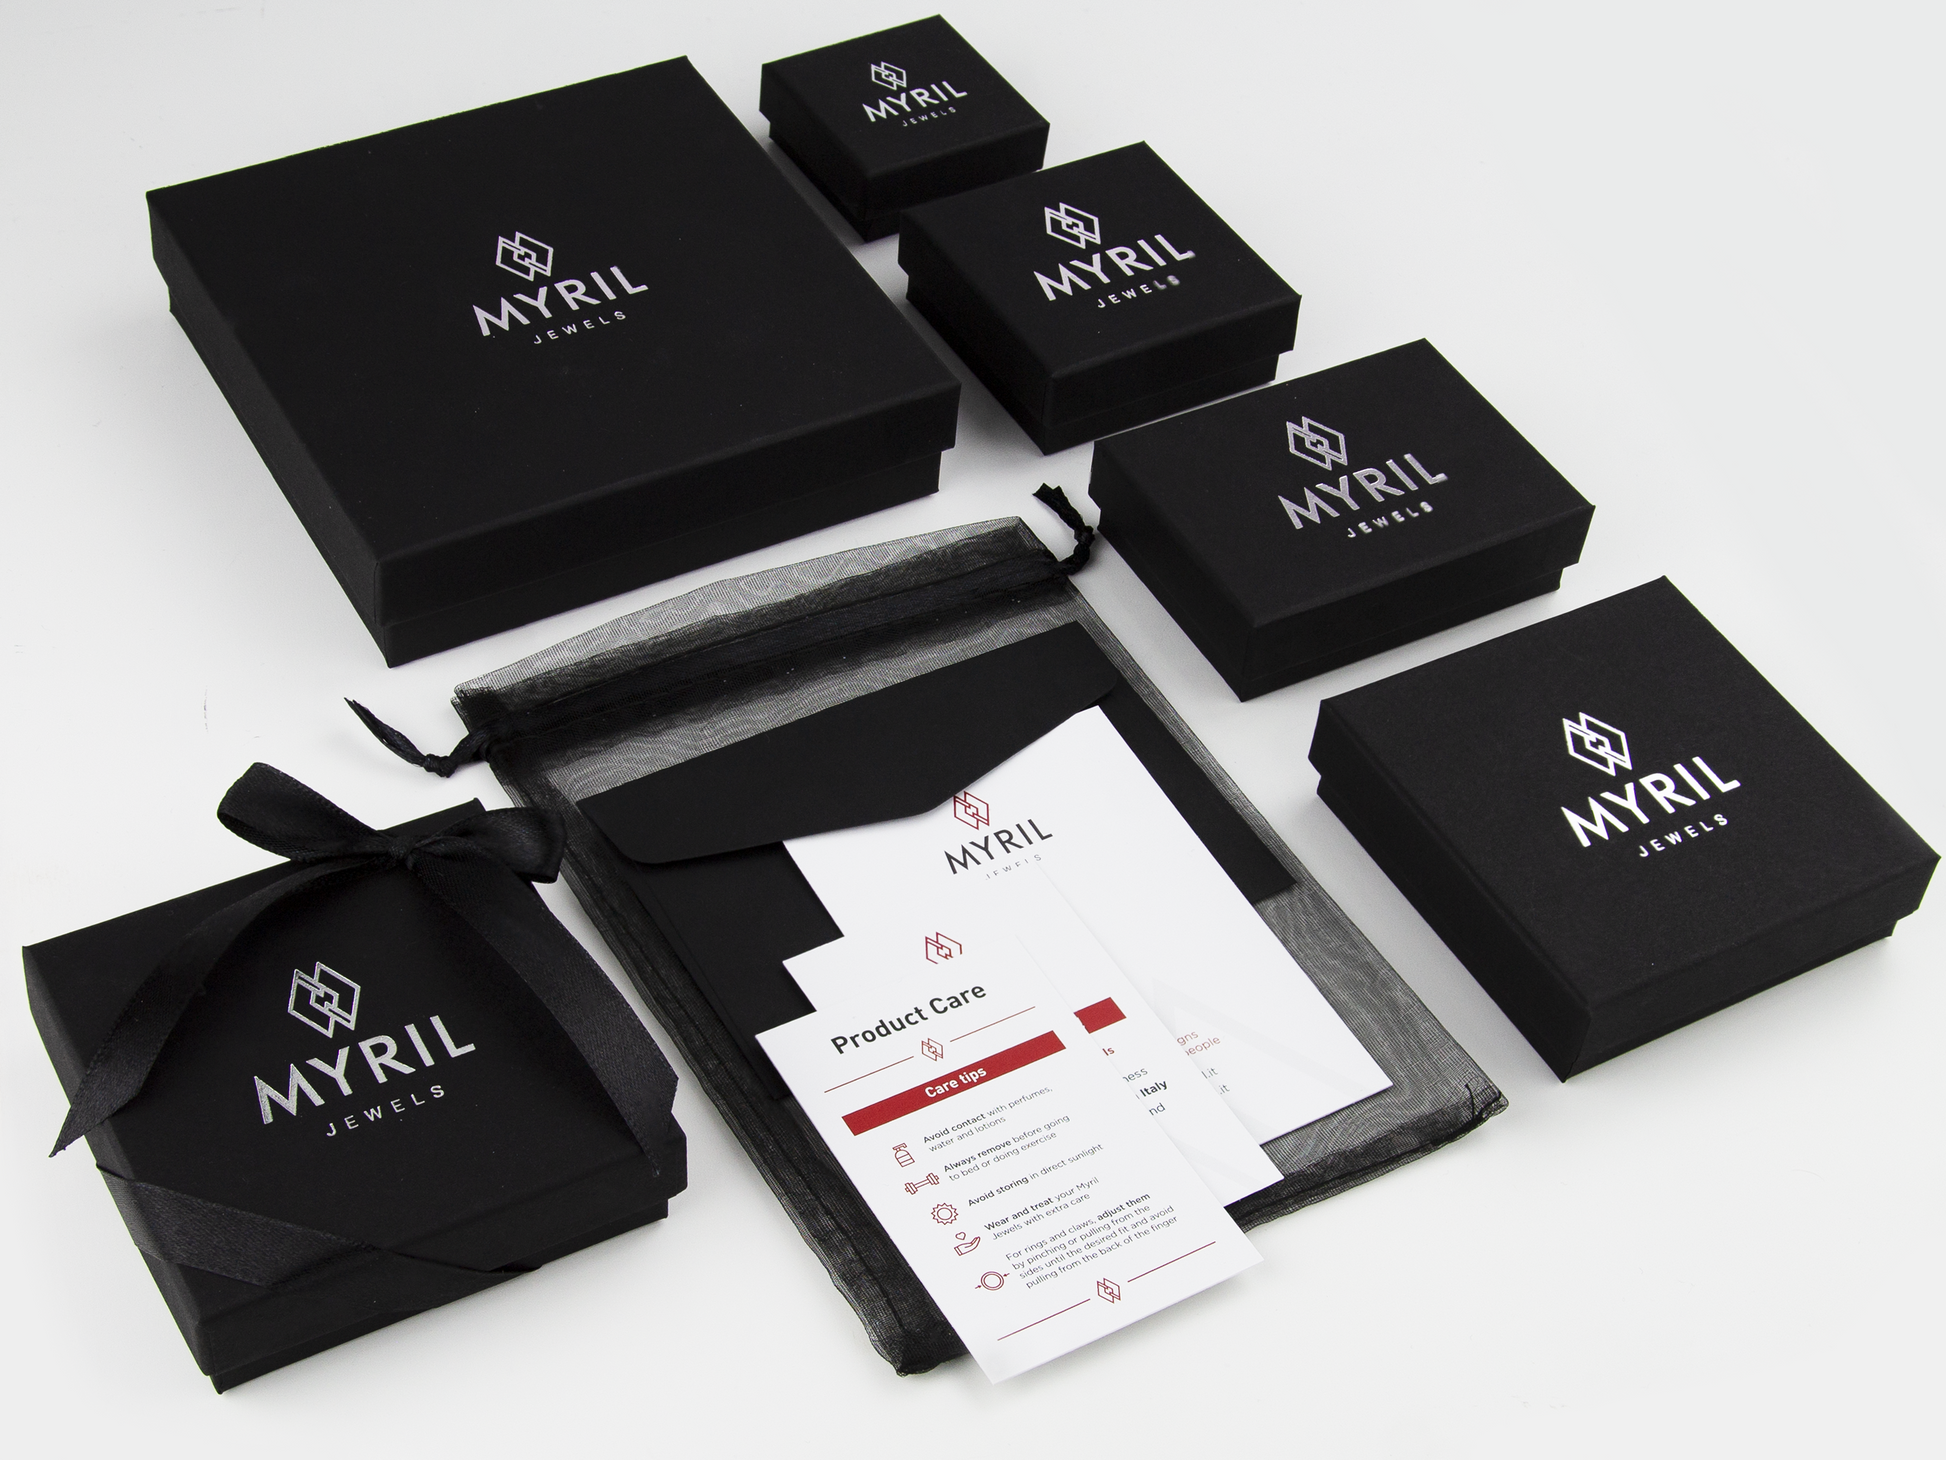 An array of Myril Jewels' sophisticated packaging arrayed on a white surface, highlighting the brand's neo-goth identity. The collection includes elegantly designed black boxes of various sizes, all emblazoned with the Myril Jewels logo in white. Accompanying the boxes are delicate black organza bags and a product care instruction card, presenting a complete package that resonates with lovers of gothic-chic, witchcore, and dark-avantgarde accessories